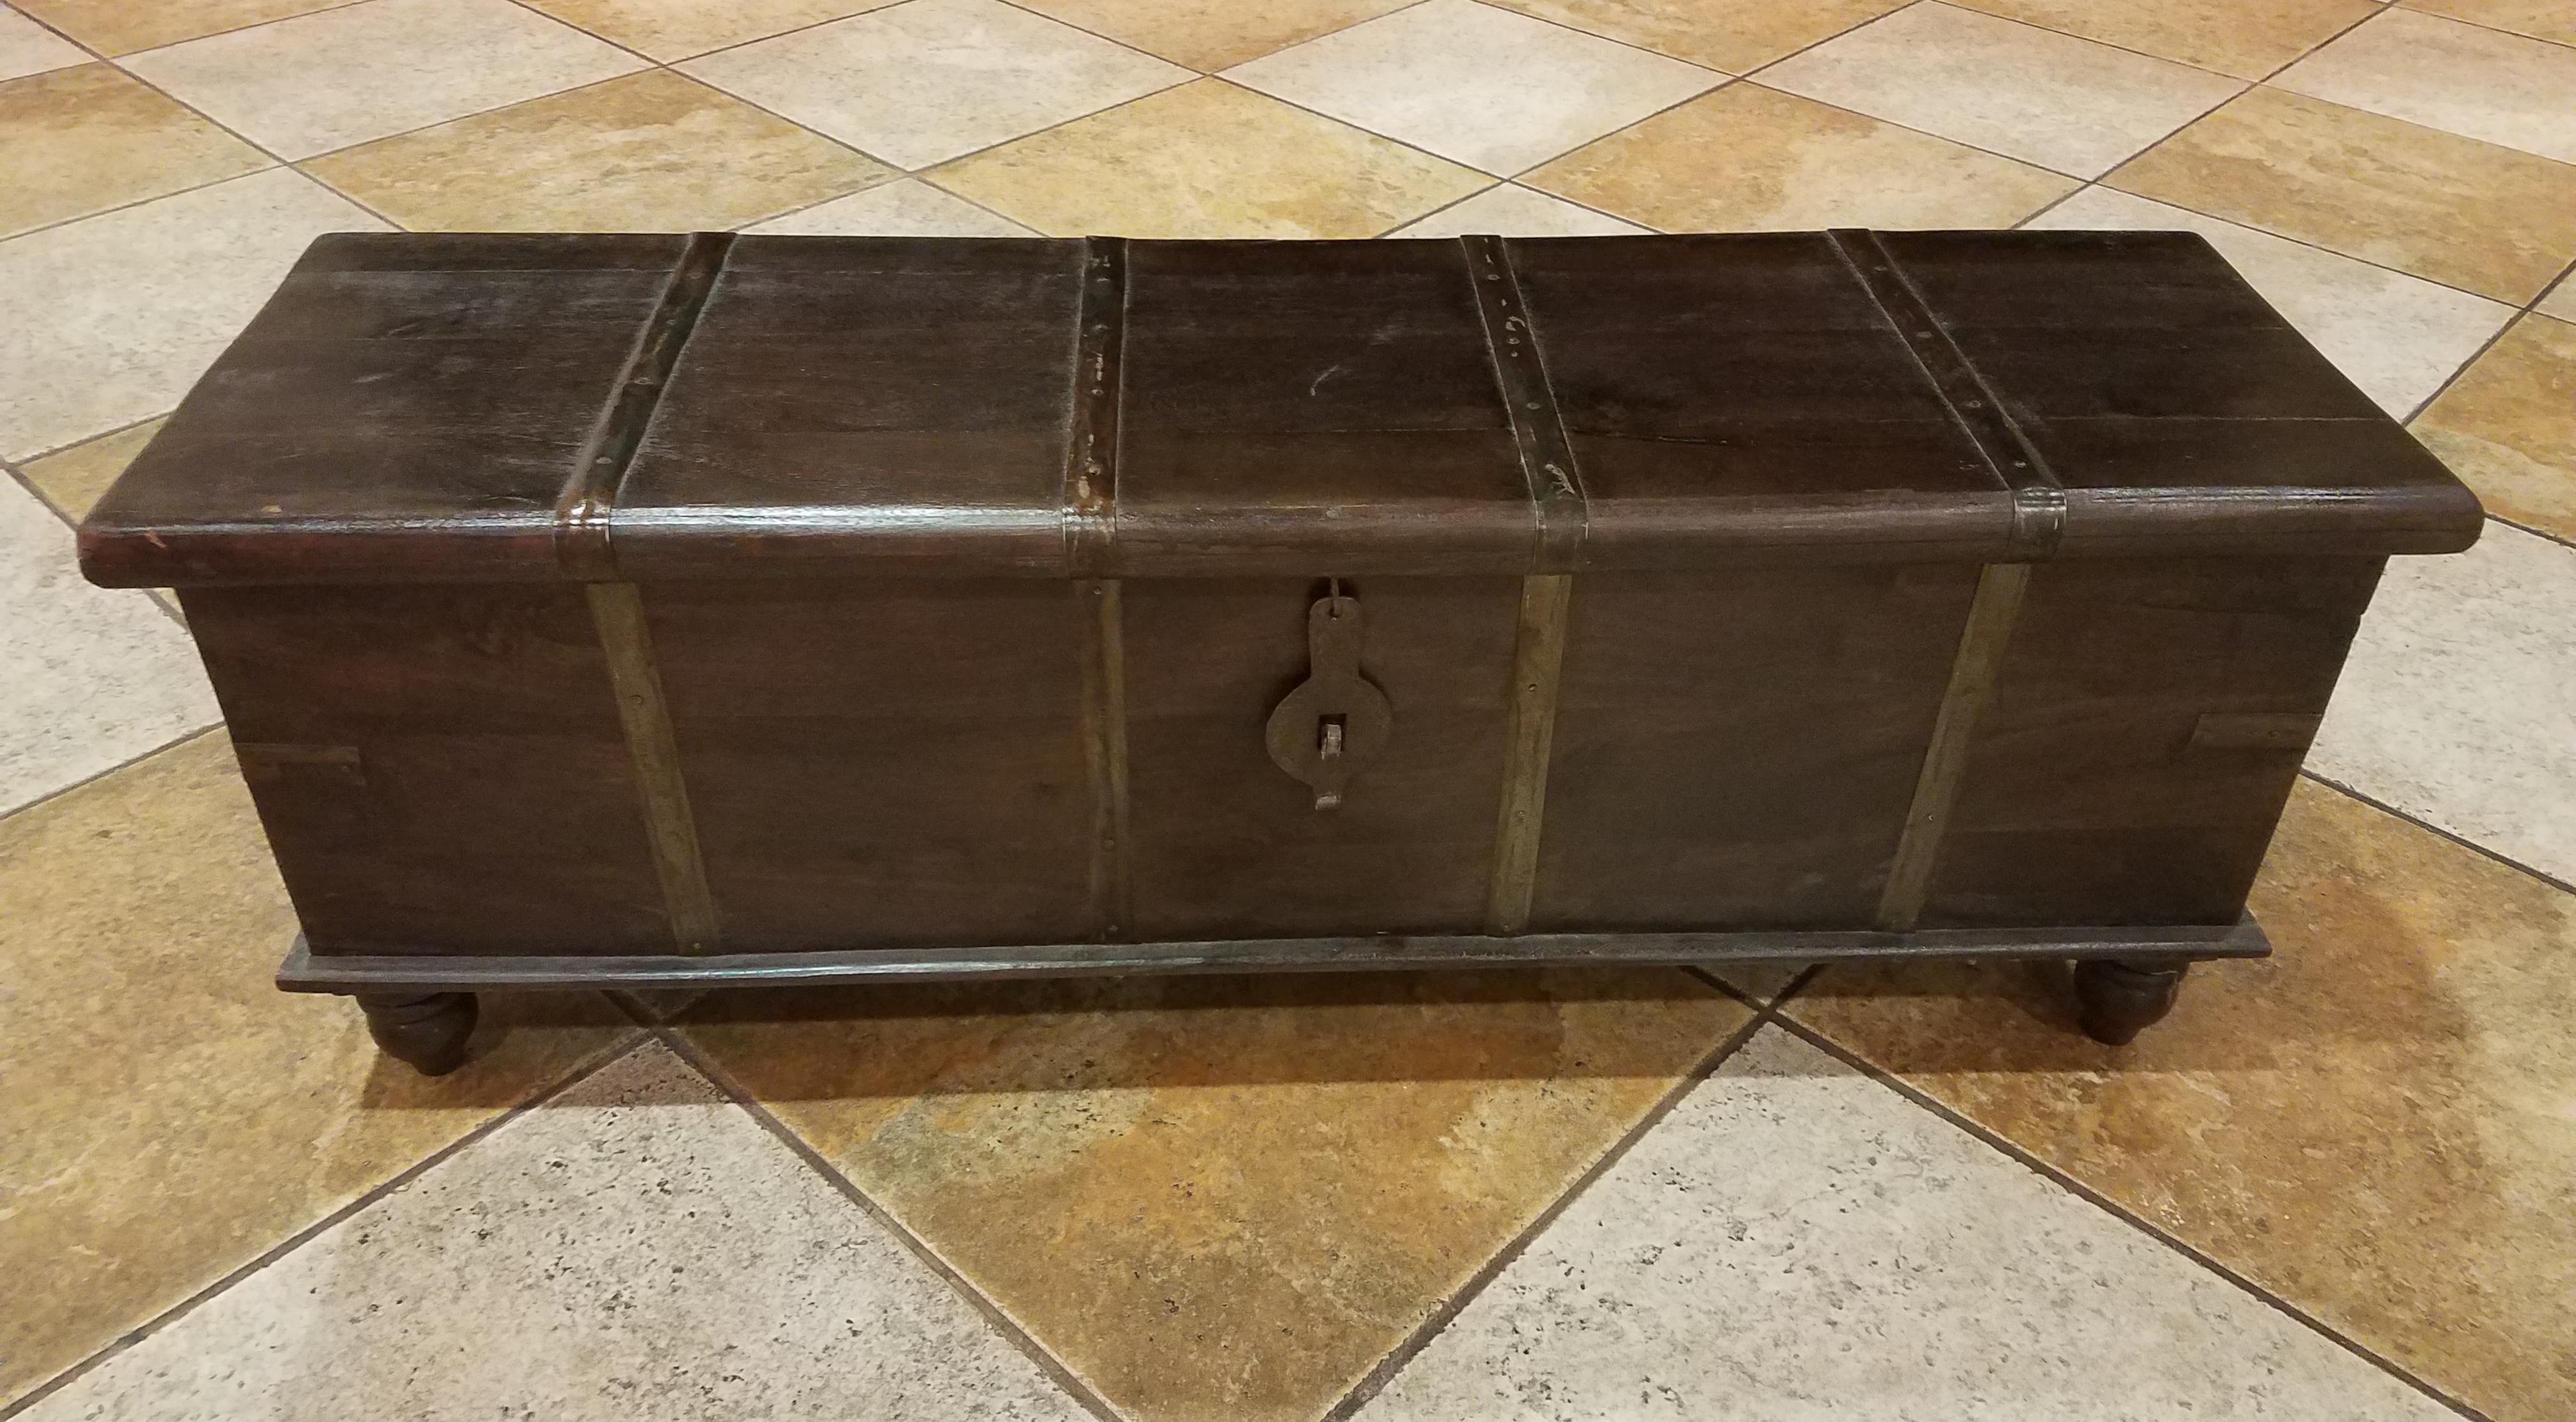 We carry a wide range of beautiful trunks from many parts of the world. This one is a very solid teak wood trunk, with plenty of storage space, and can placed at the foot of a bed, can be used as a TV stand, aquarium support base, blanket chest, or